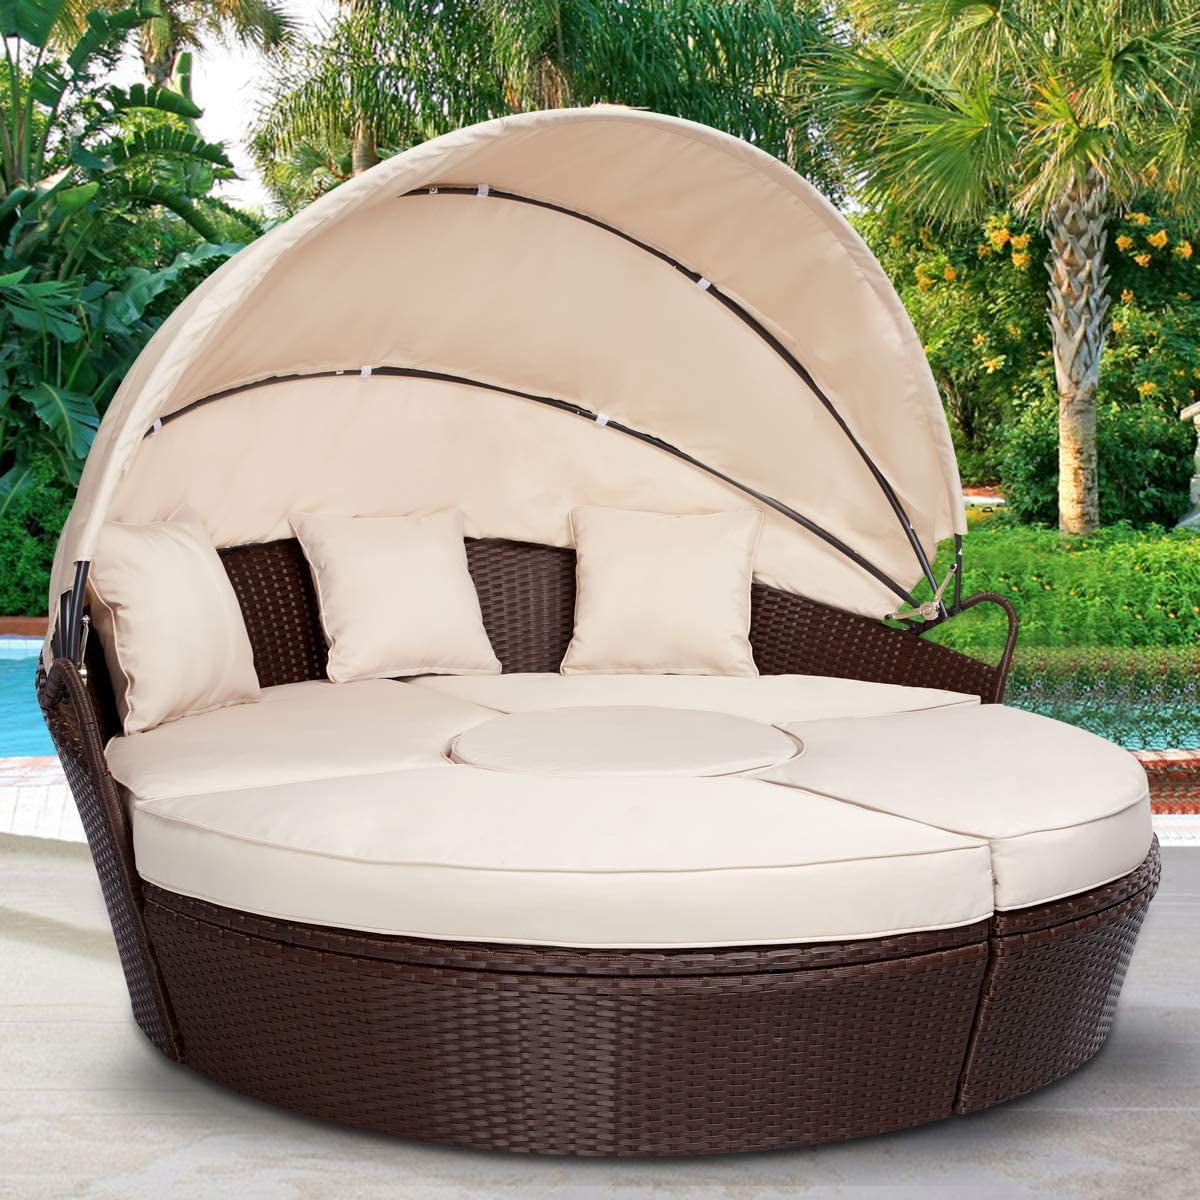 Erommy Outdoor Furniture Round Daybed with Retractable Canopy